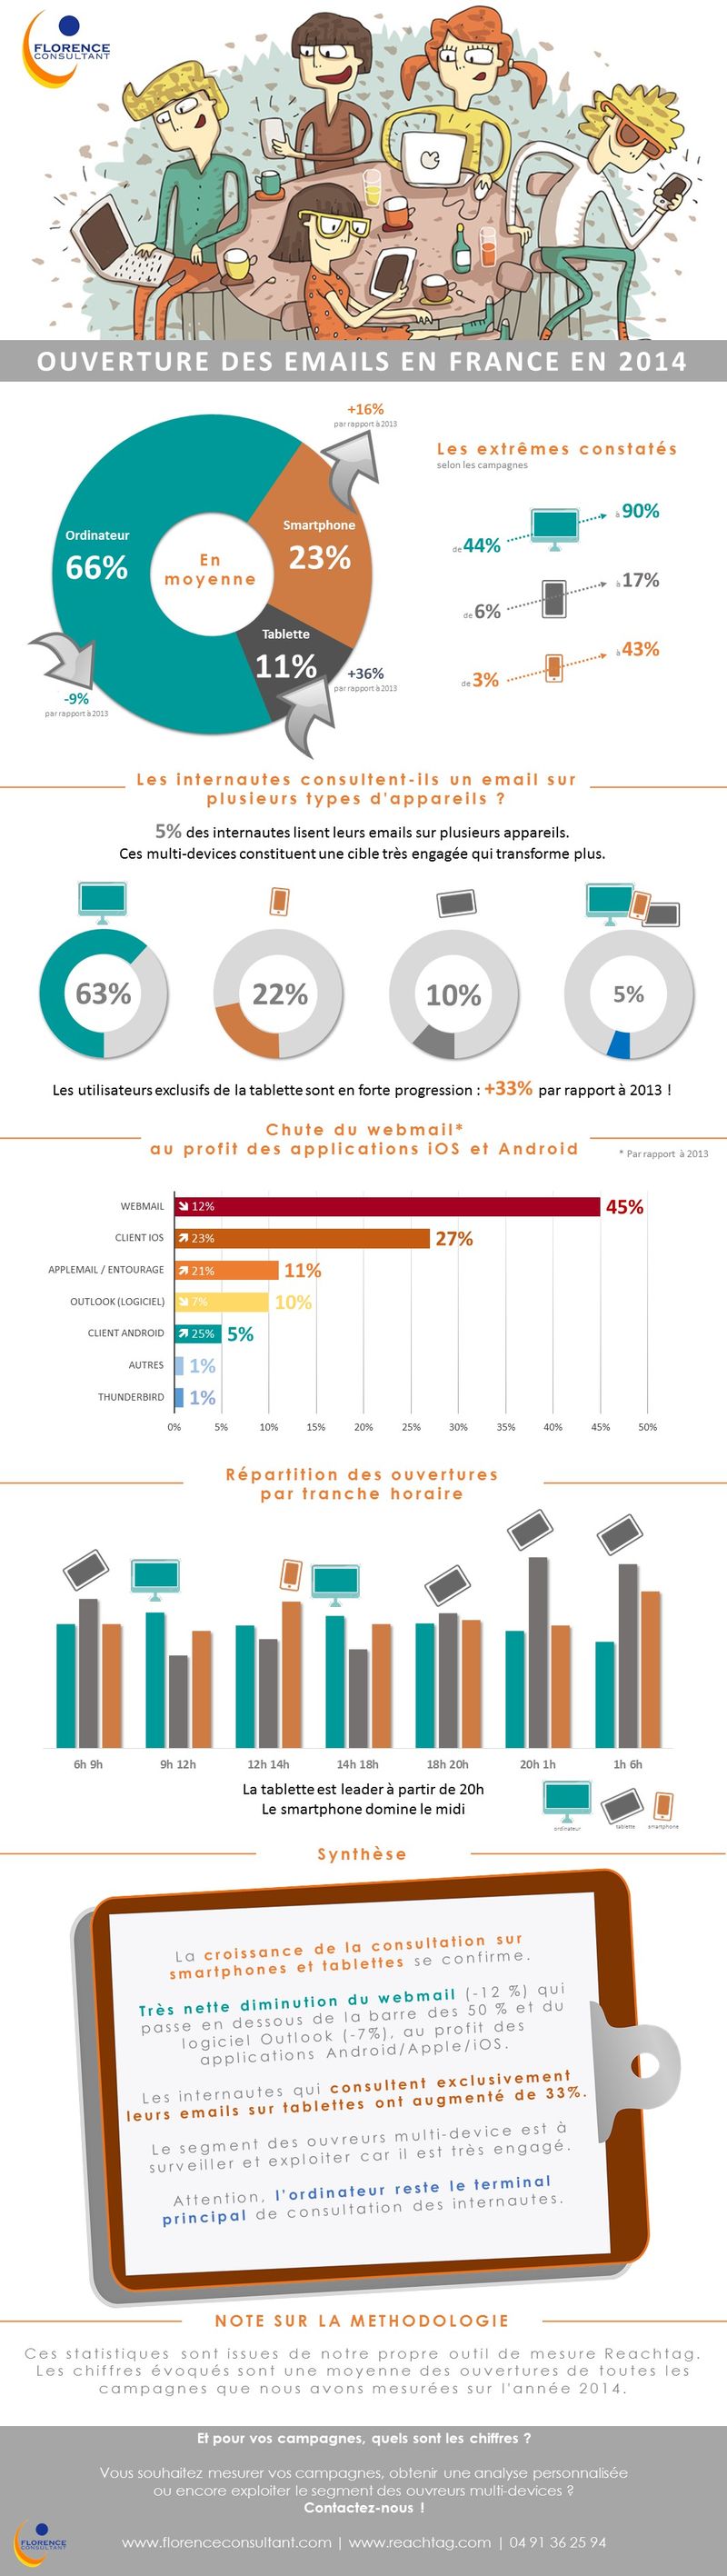 Infographie_ouverture-email_2015